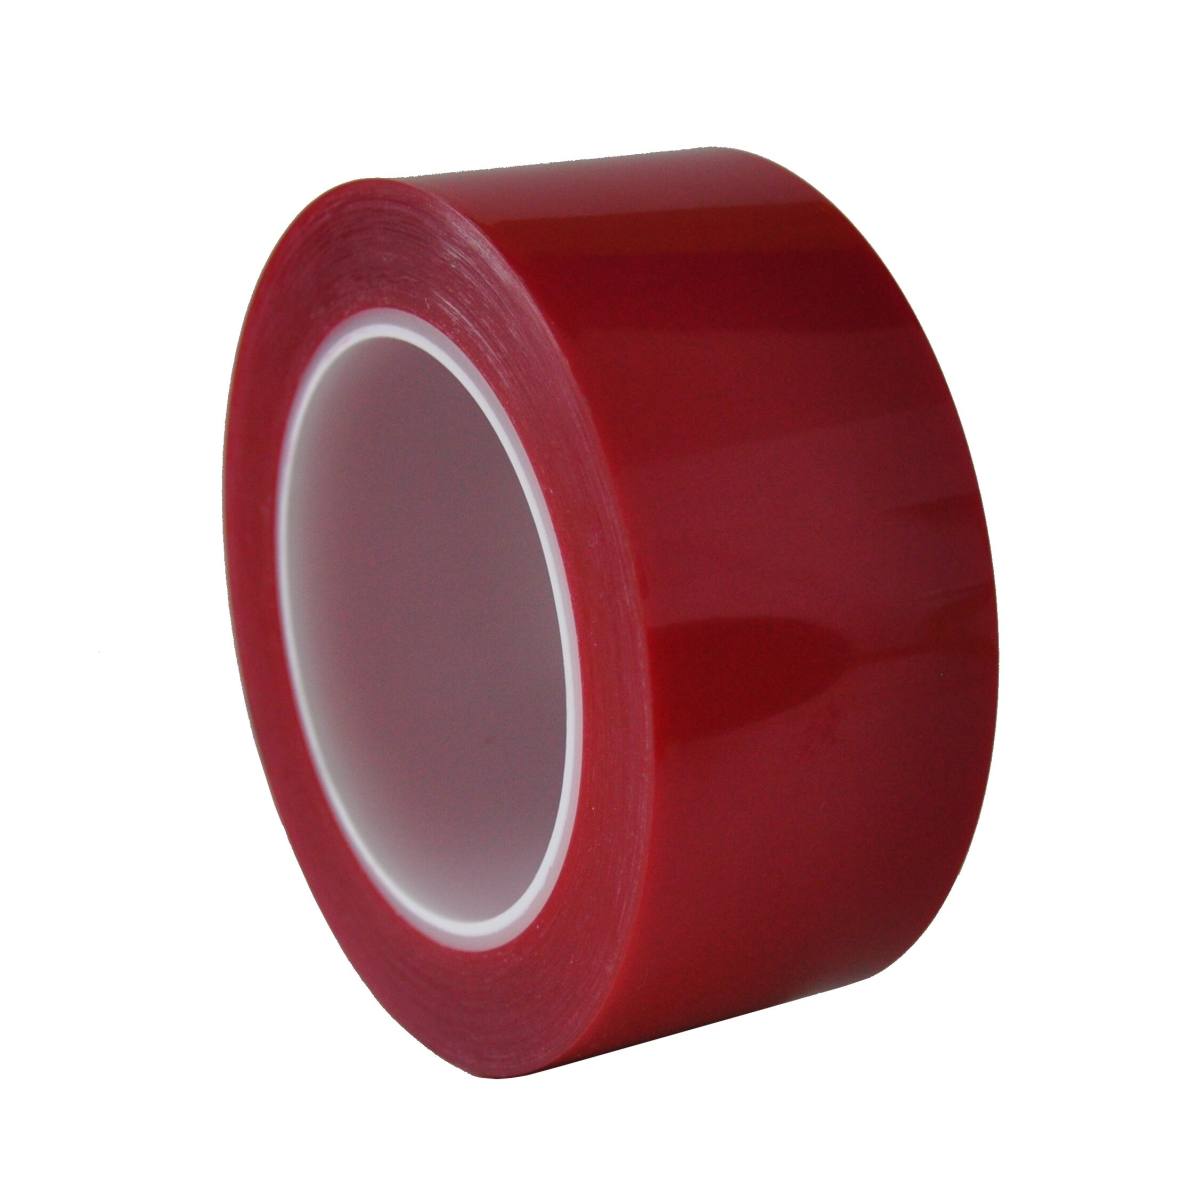 S-K-S 208R polyester plakband, 9mmx66m, rood